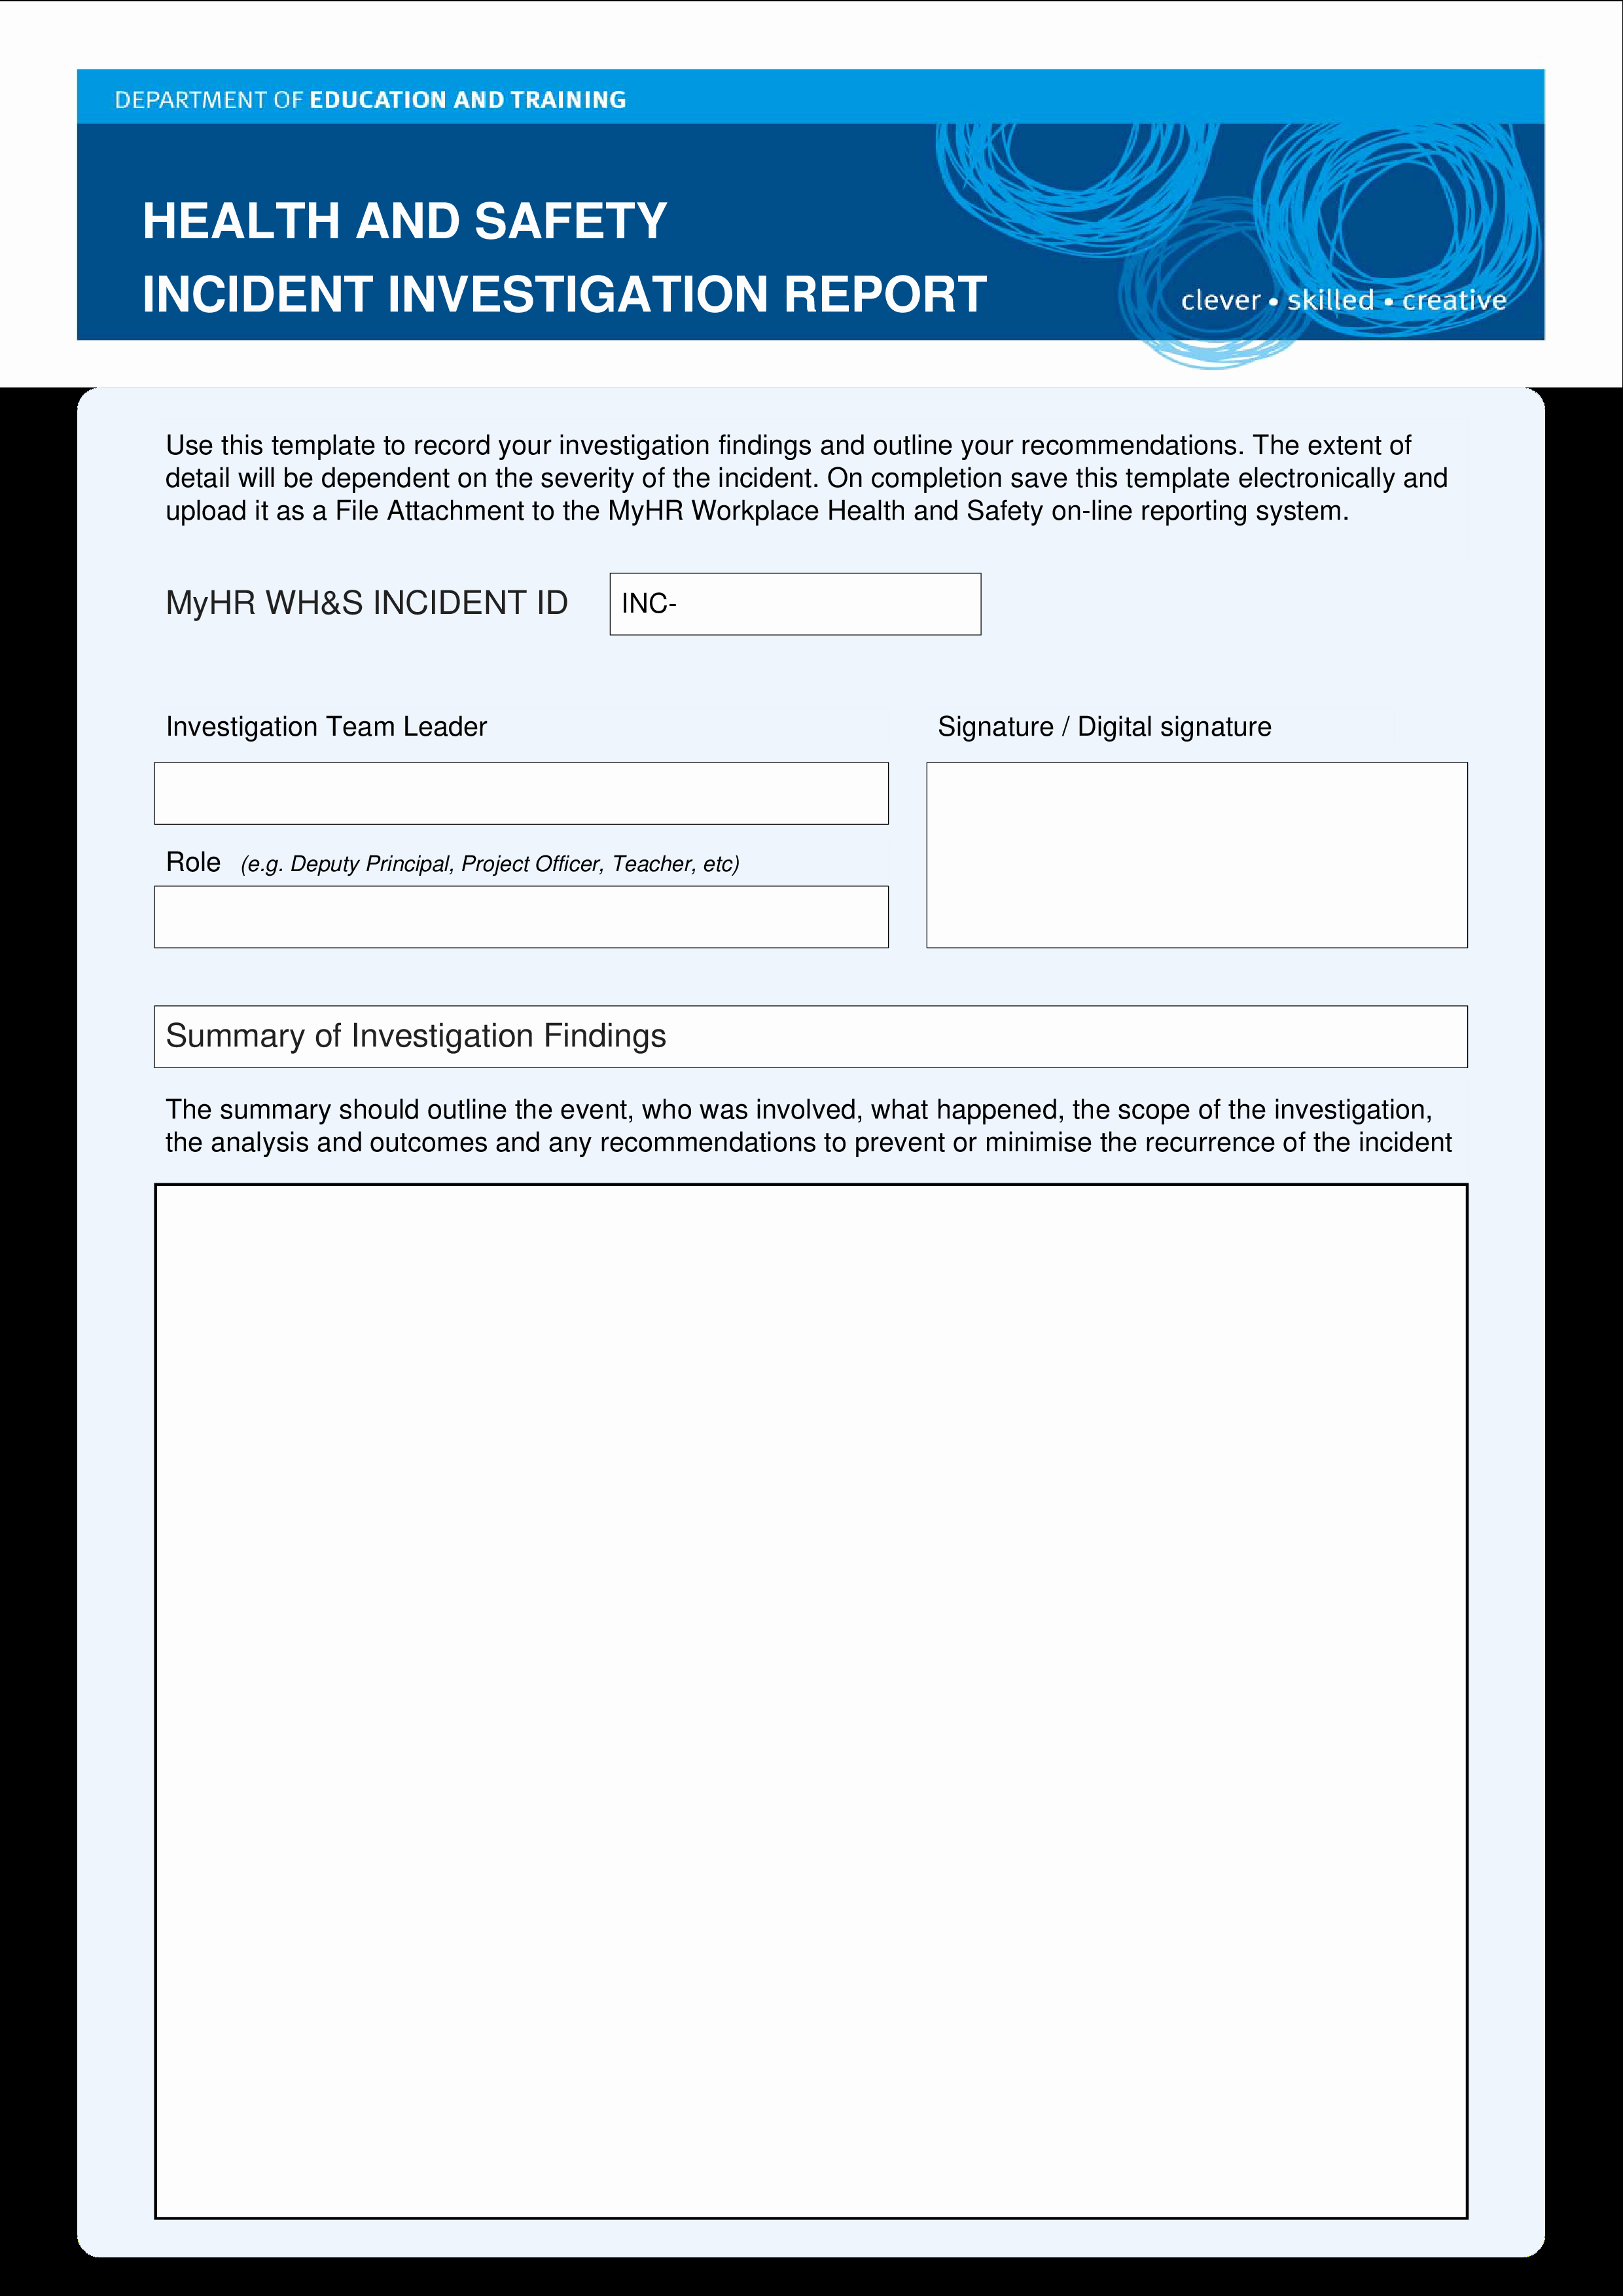 Incident Investigation Report Template Best Of Free Hse Health Safety Incident Investigation Report